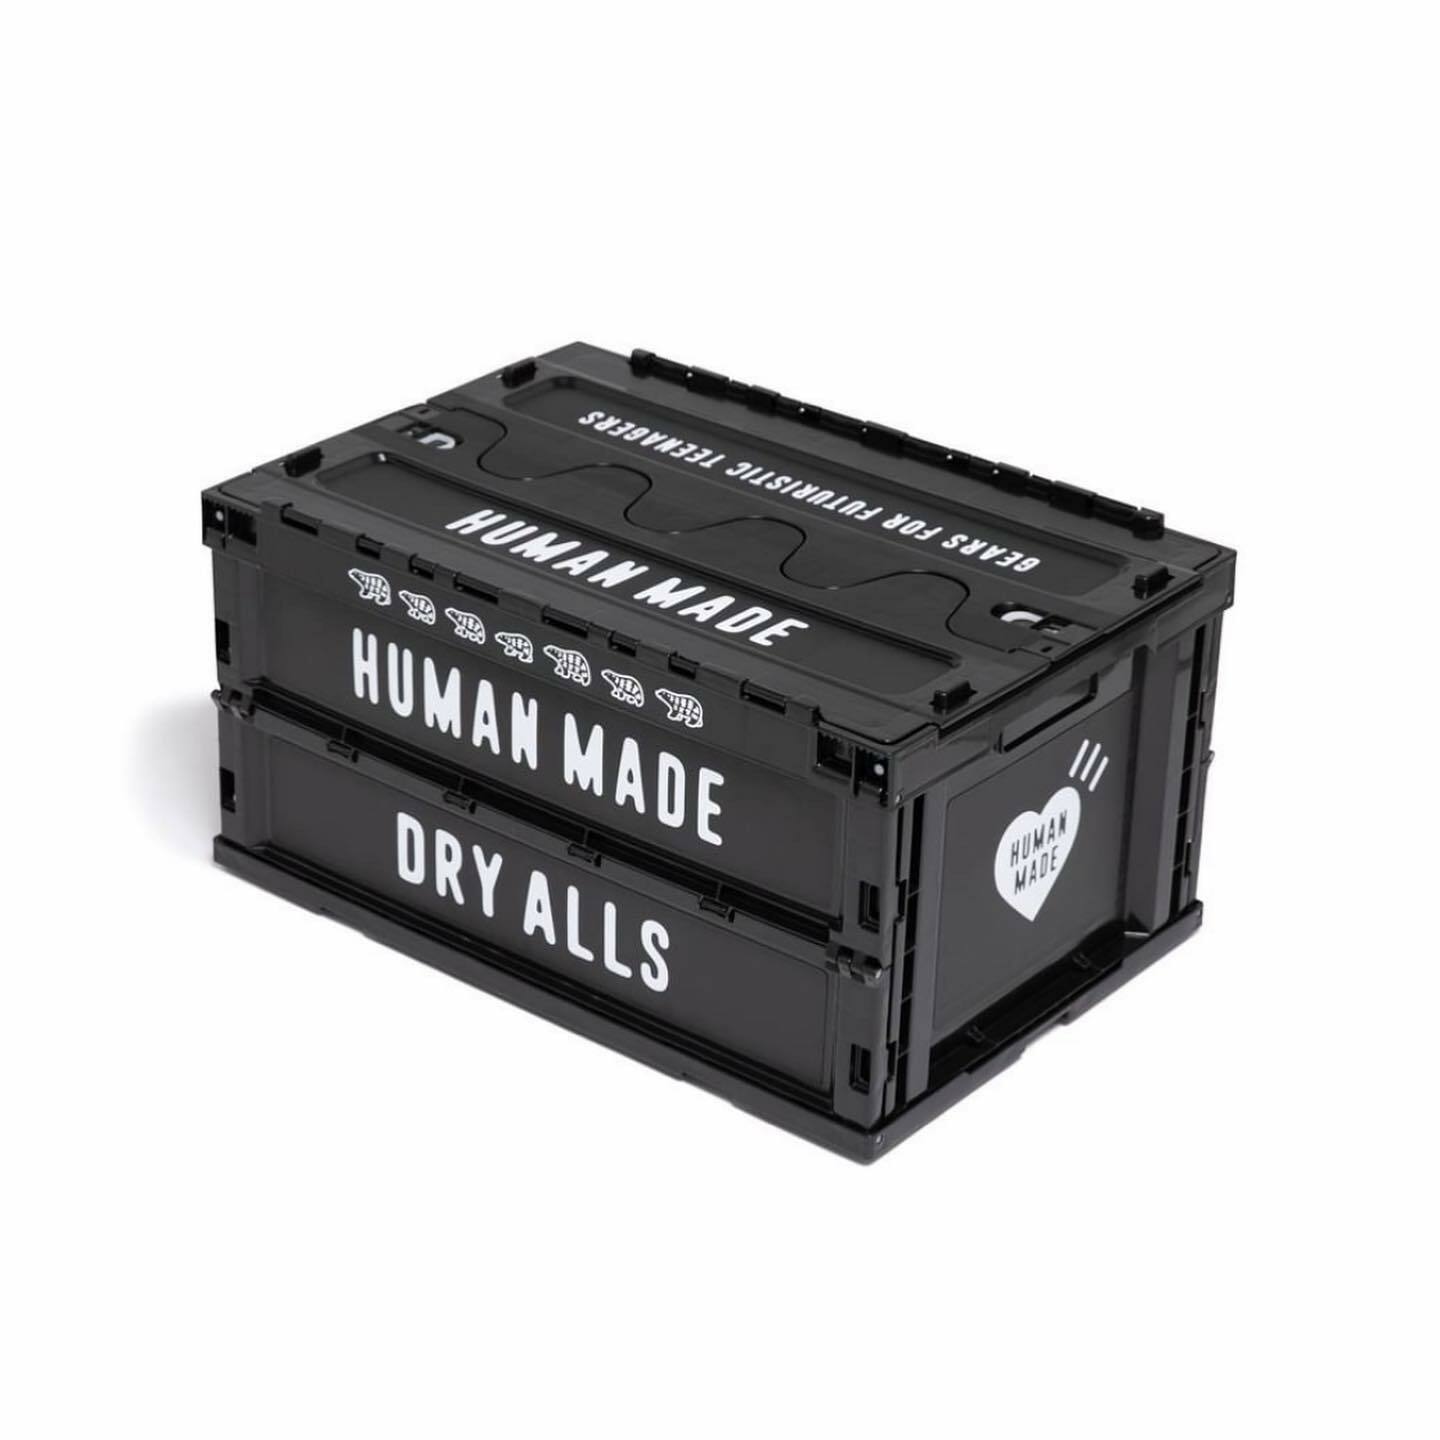 Human Made Container (Black)